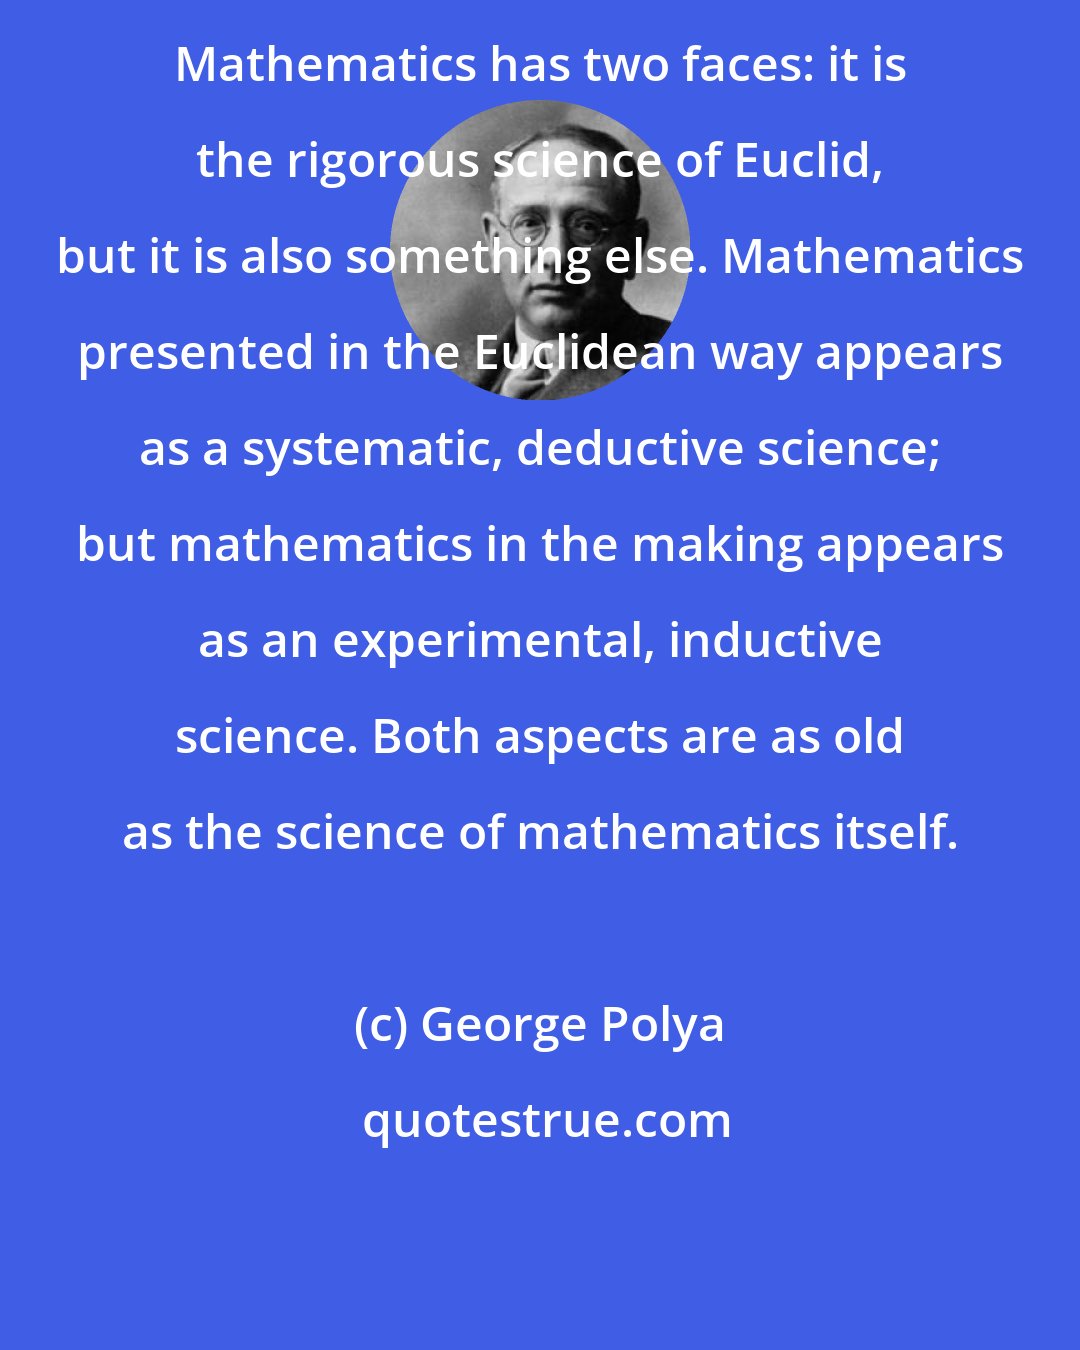 George Polya: Mathematics has two faces: it is the rigorous science of Euclid, but it is also something else. Mathematics presented in the Euclidean way appears as a systematic, deductive science; but mathematics in the making appears as an experimental, inductive science. Both aspects are as old as the science of mathematics itself.